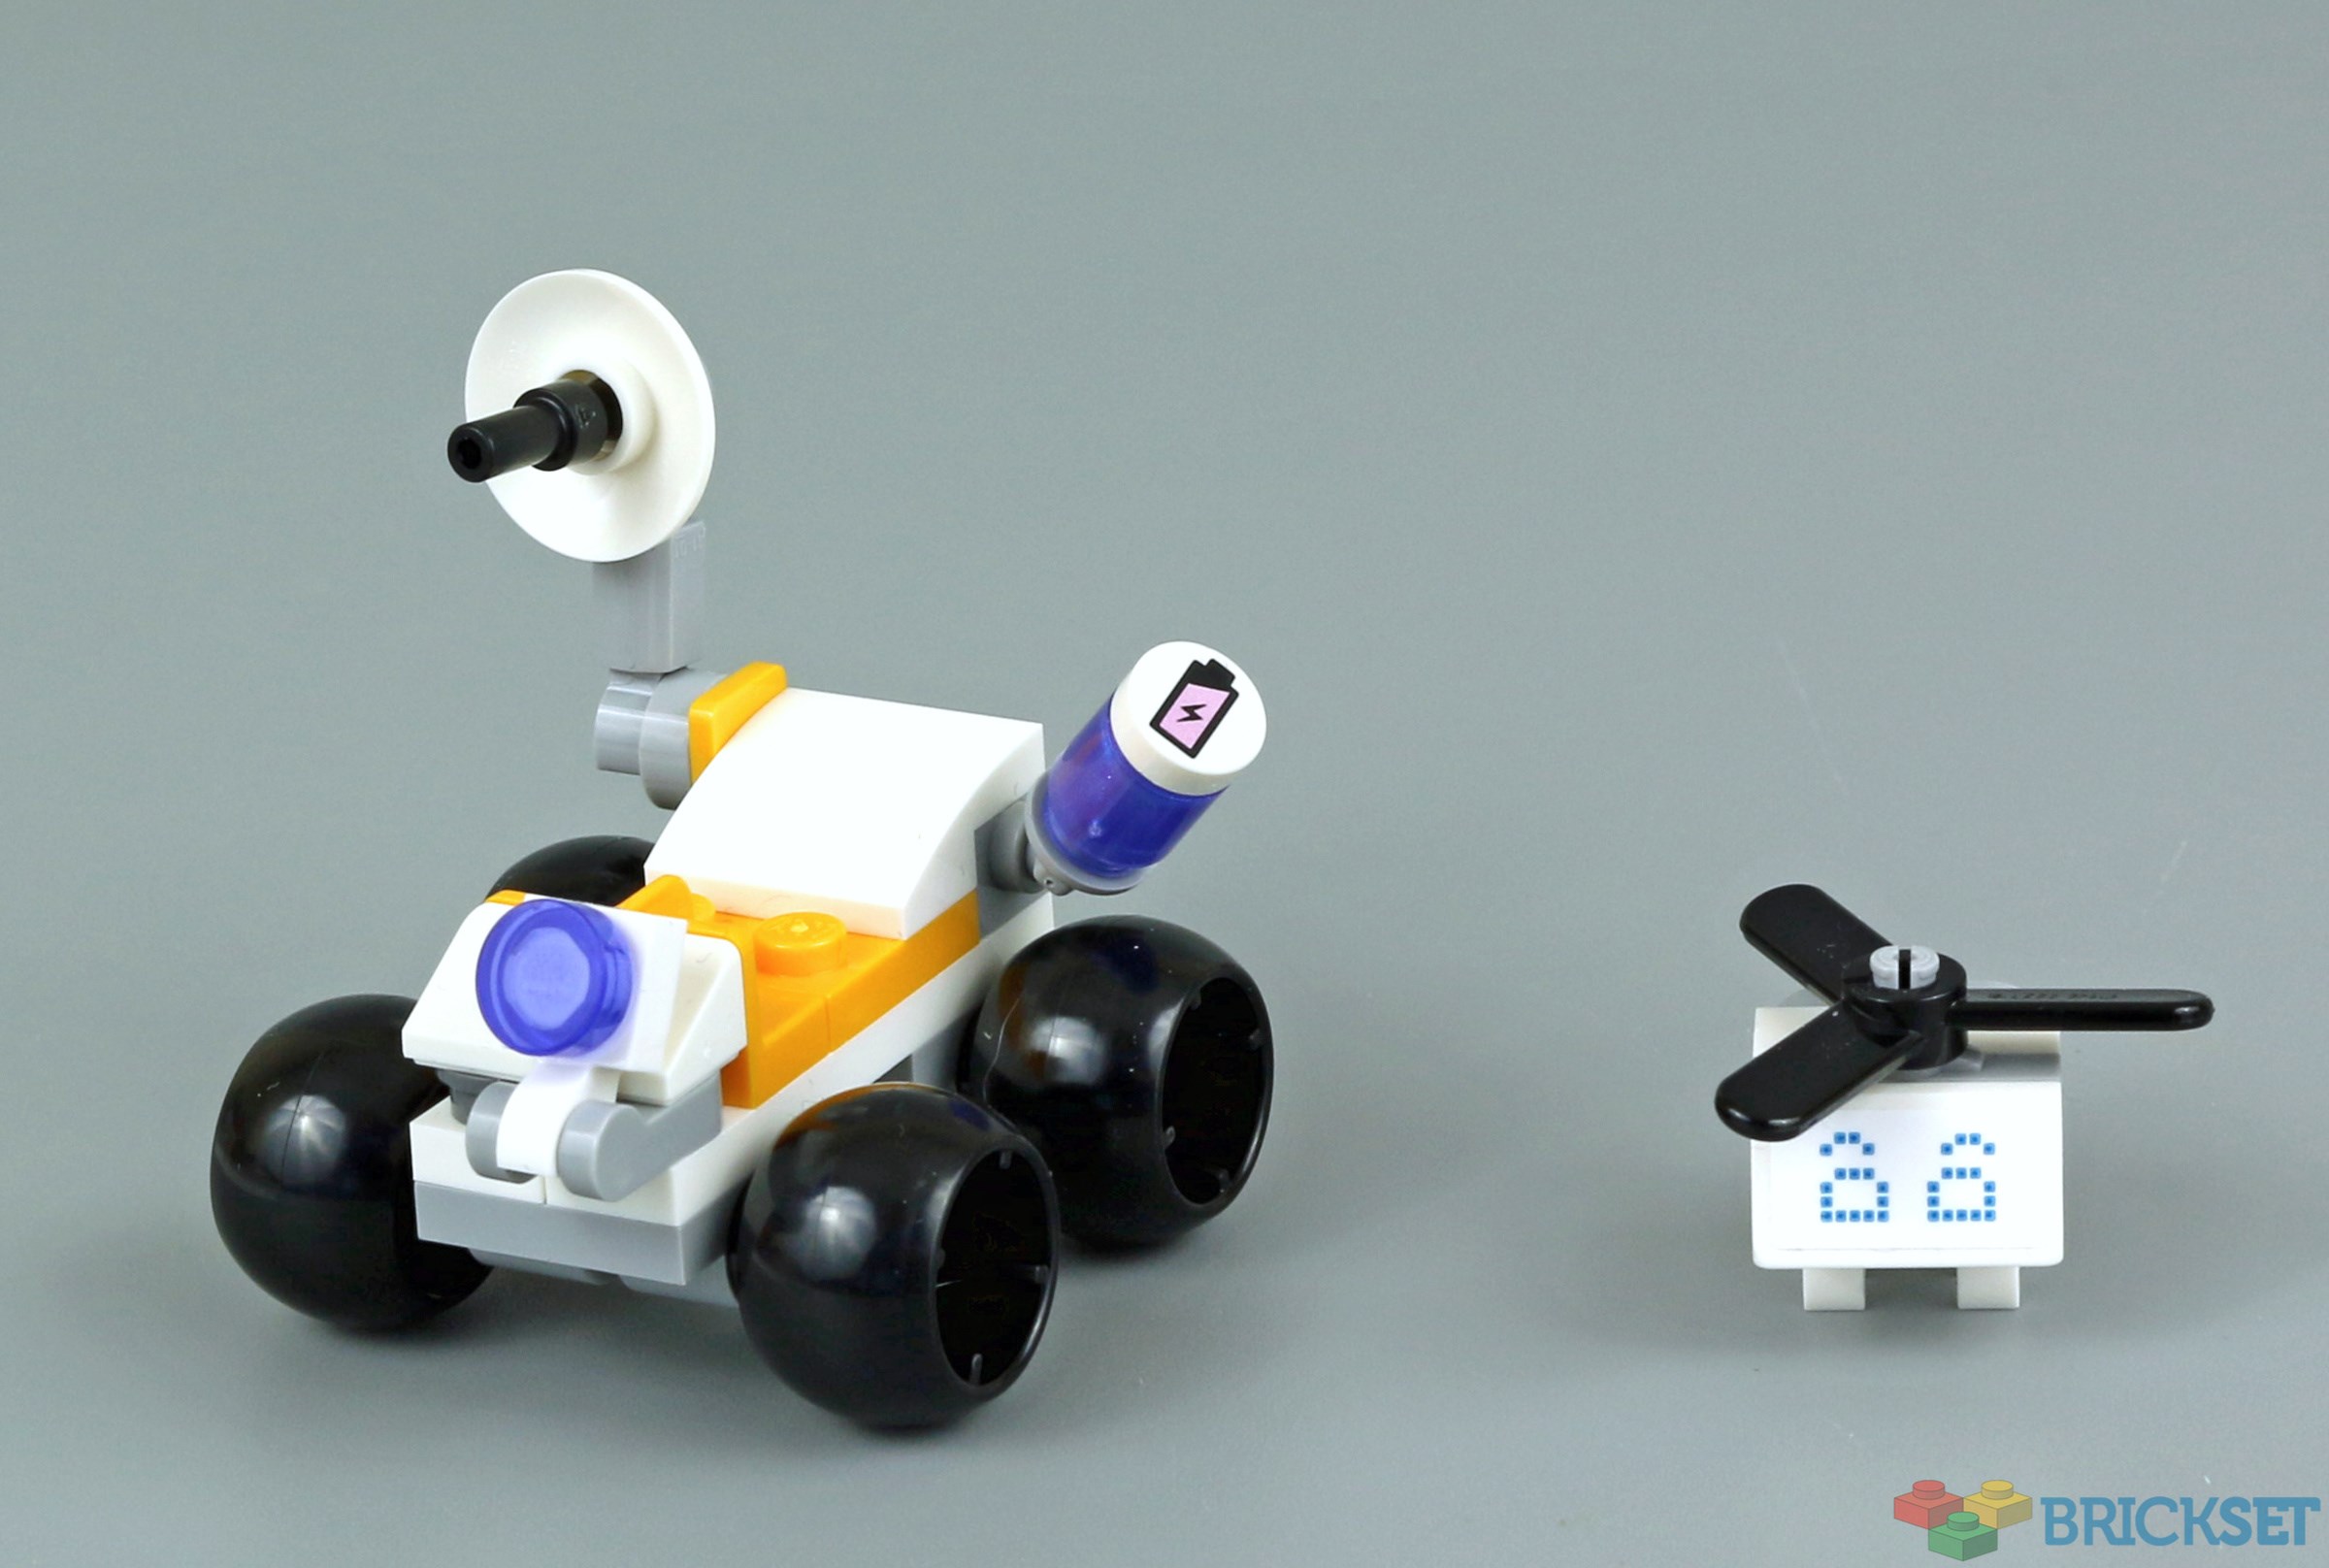 New year, new LEGO 'Space' sets: Mars bases, rockets and rovers